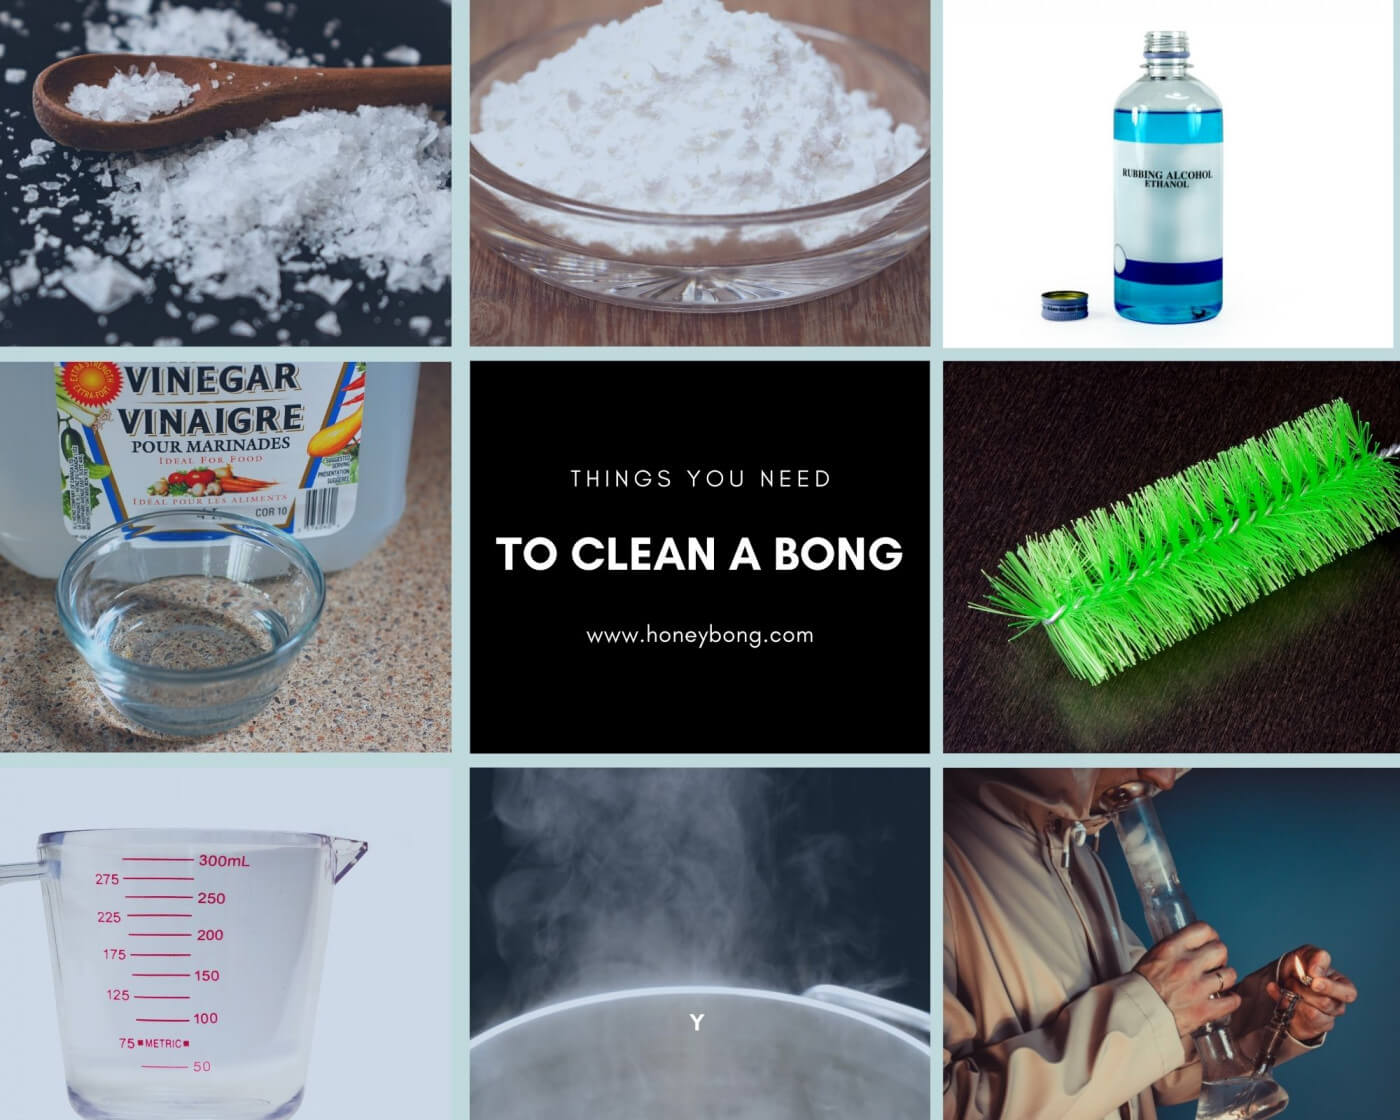 How to Clean a Bong Step by Step